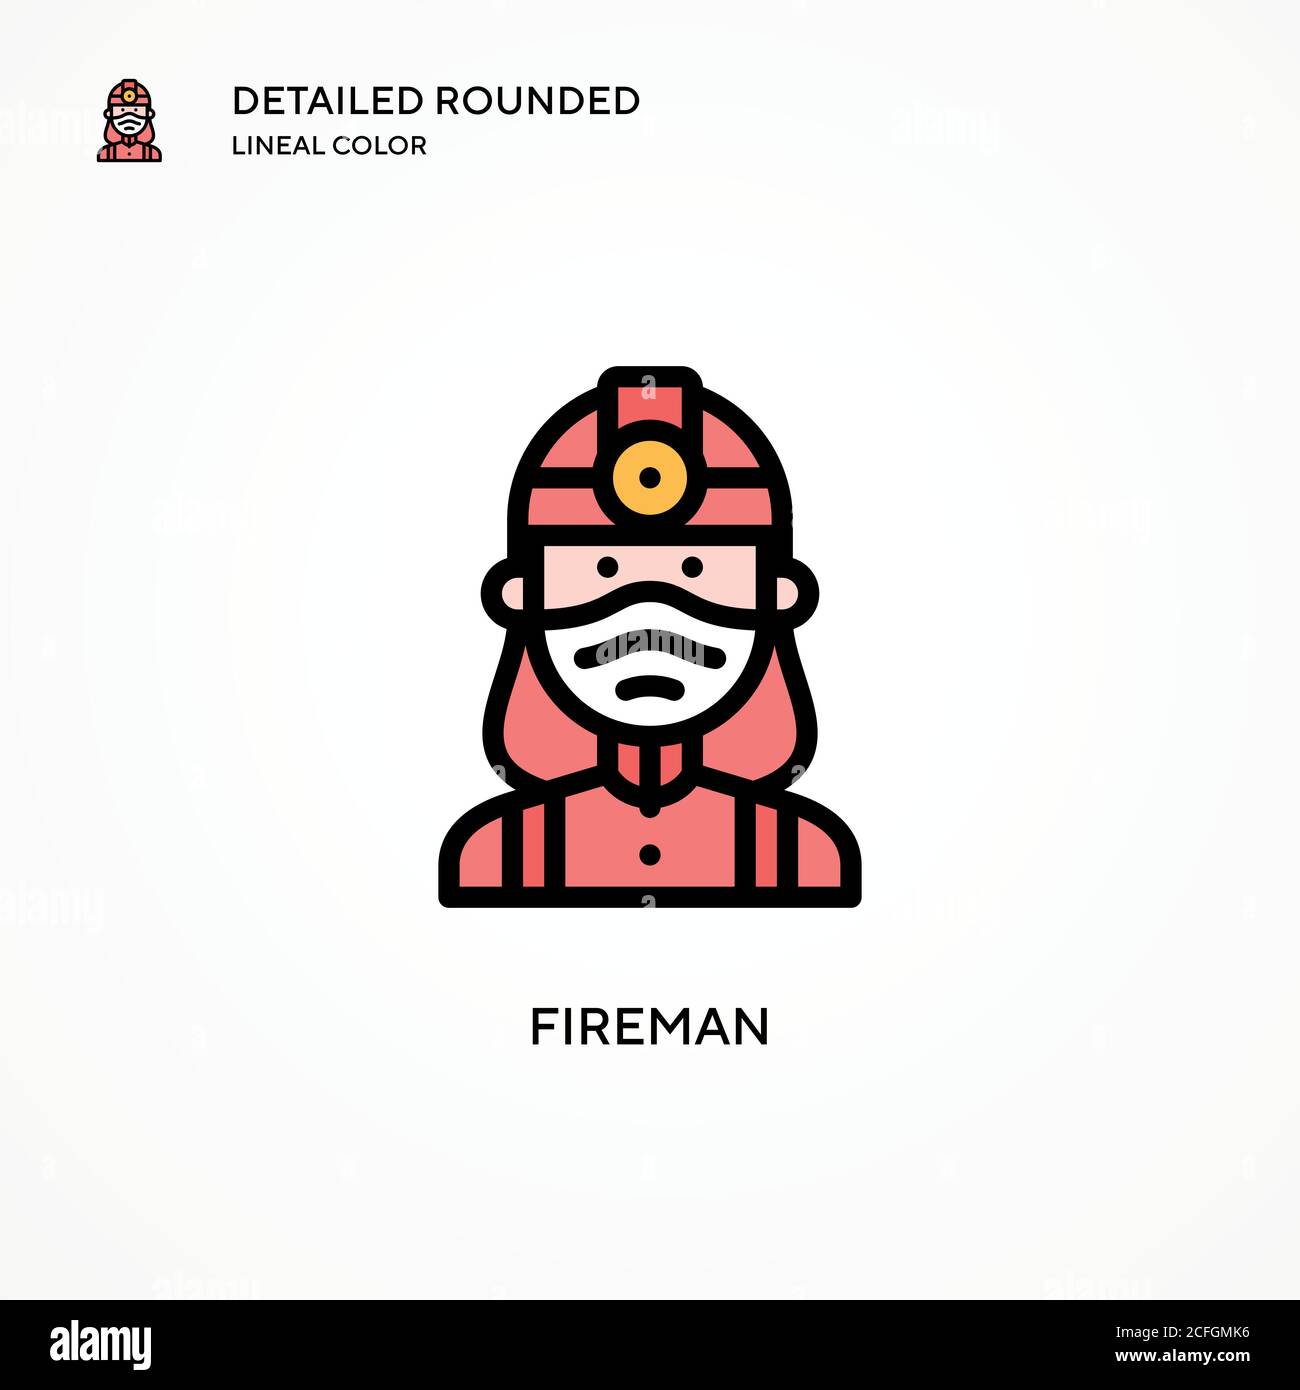 Fireman vector icon. Modern vector illustration concepts. Easy to edit and customize. Stock Vector